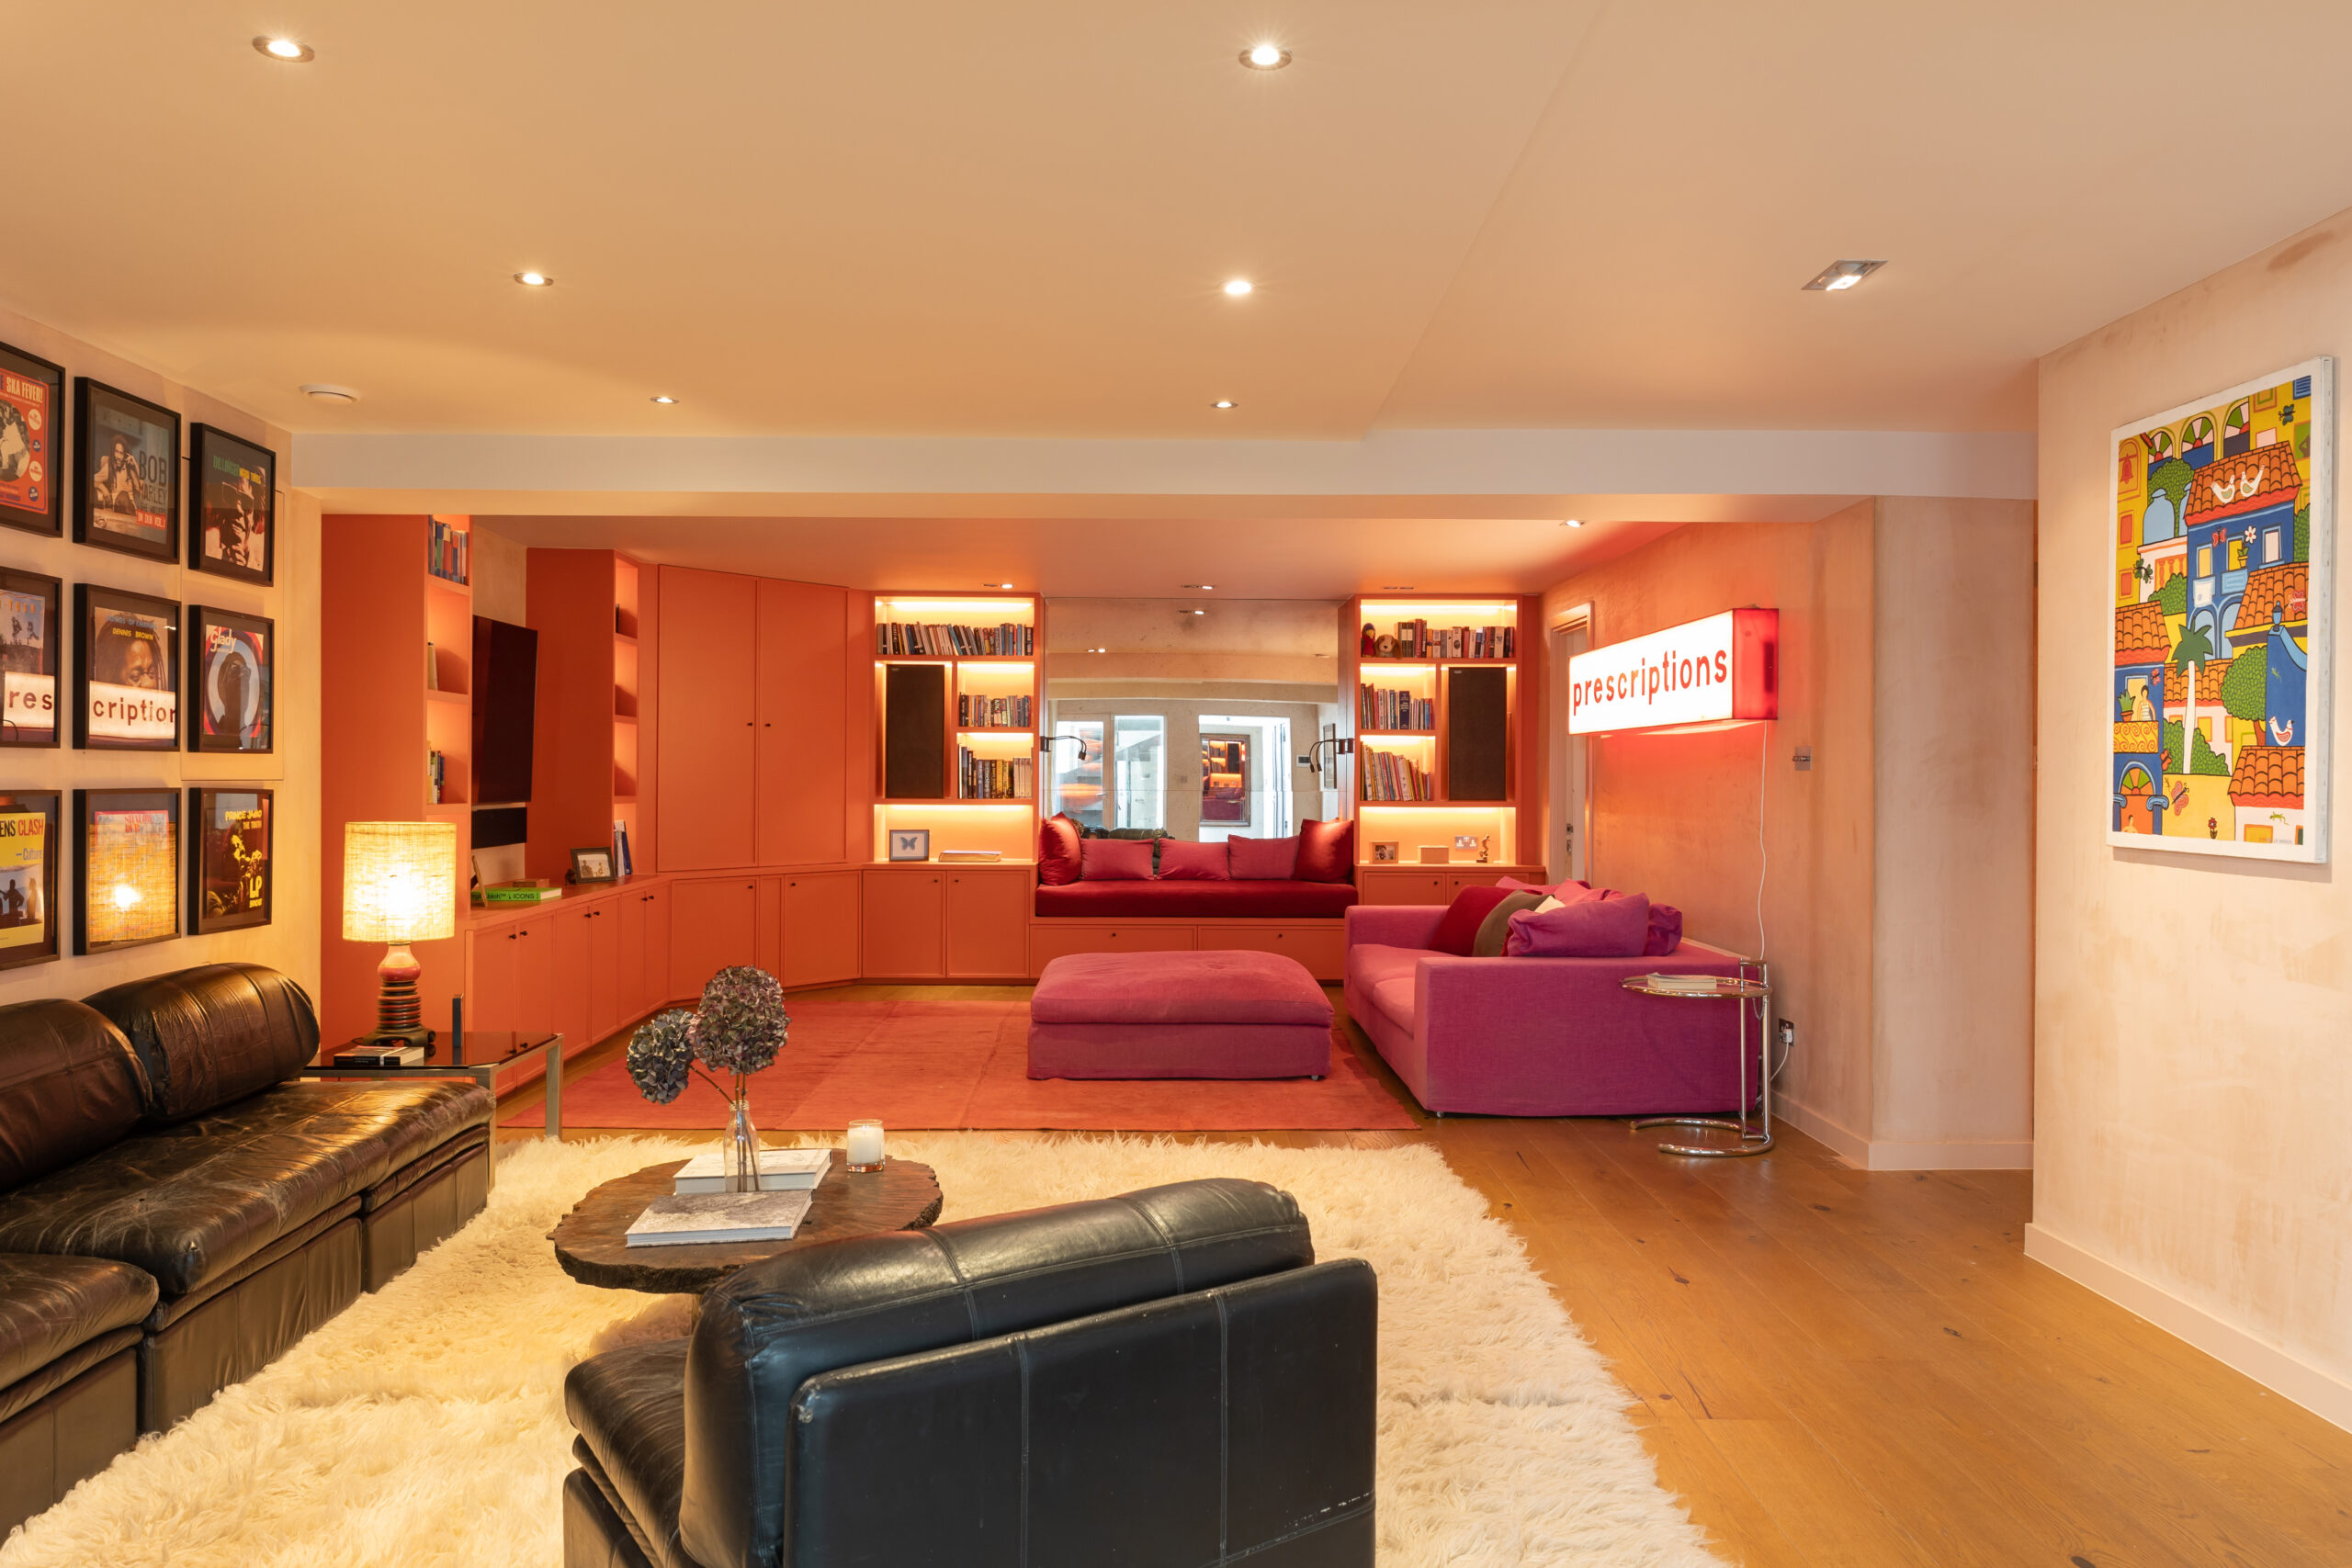 For Sale: Wornington Road North Kensington W10 living room with orange walls and leather sofas